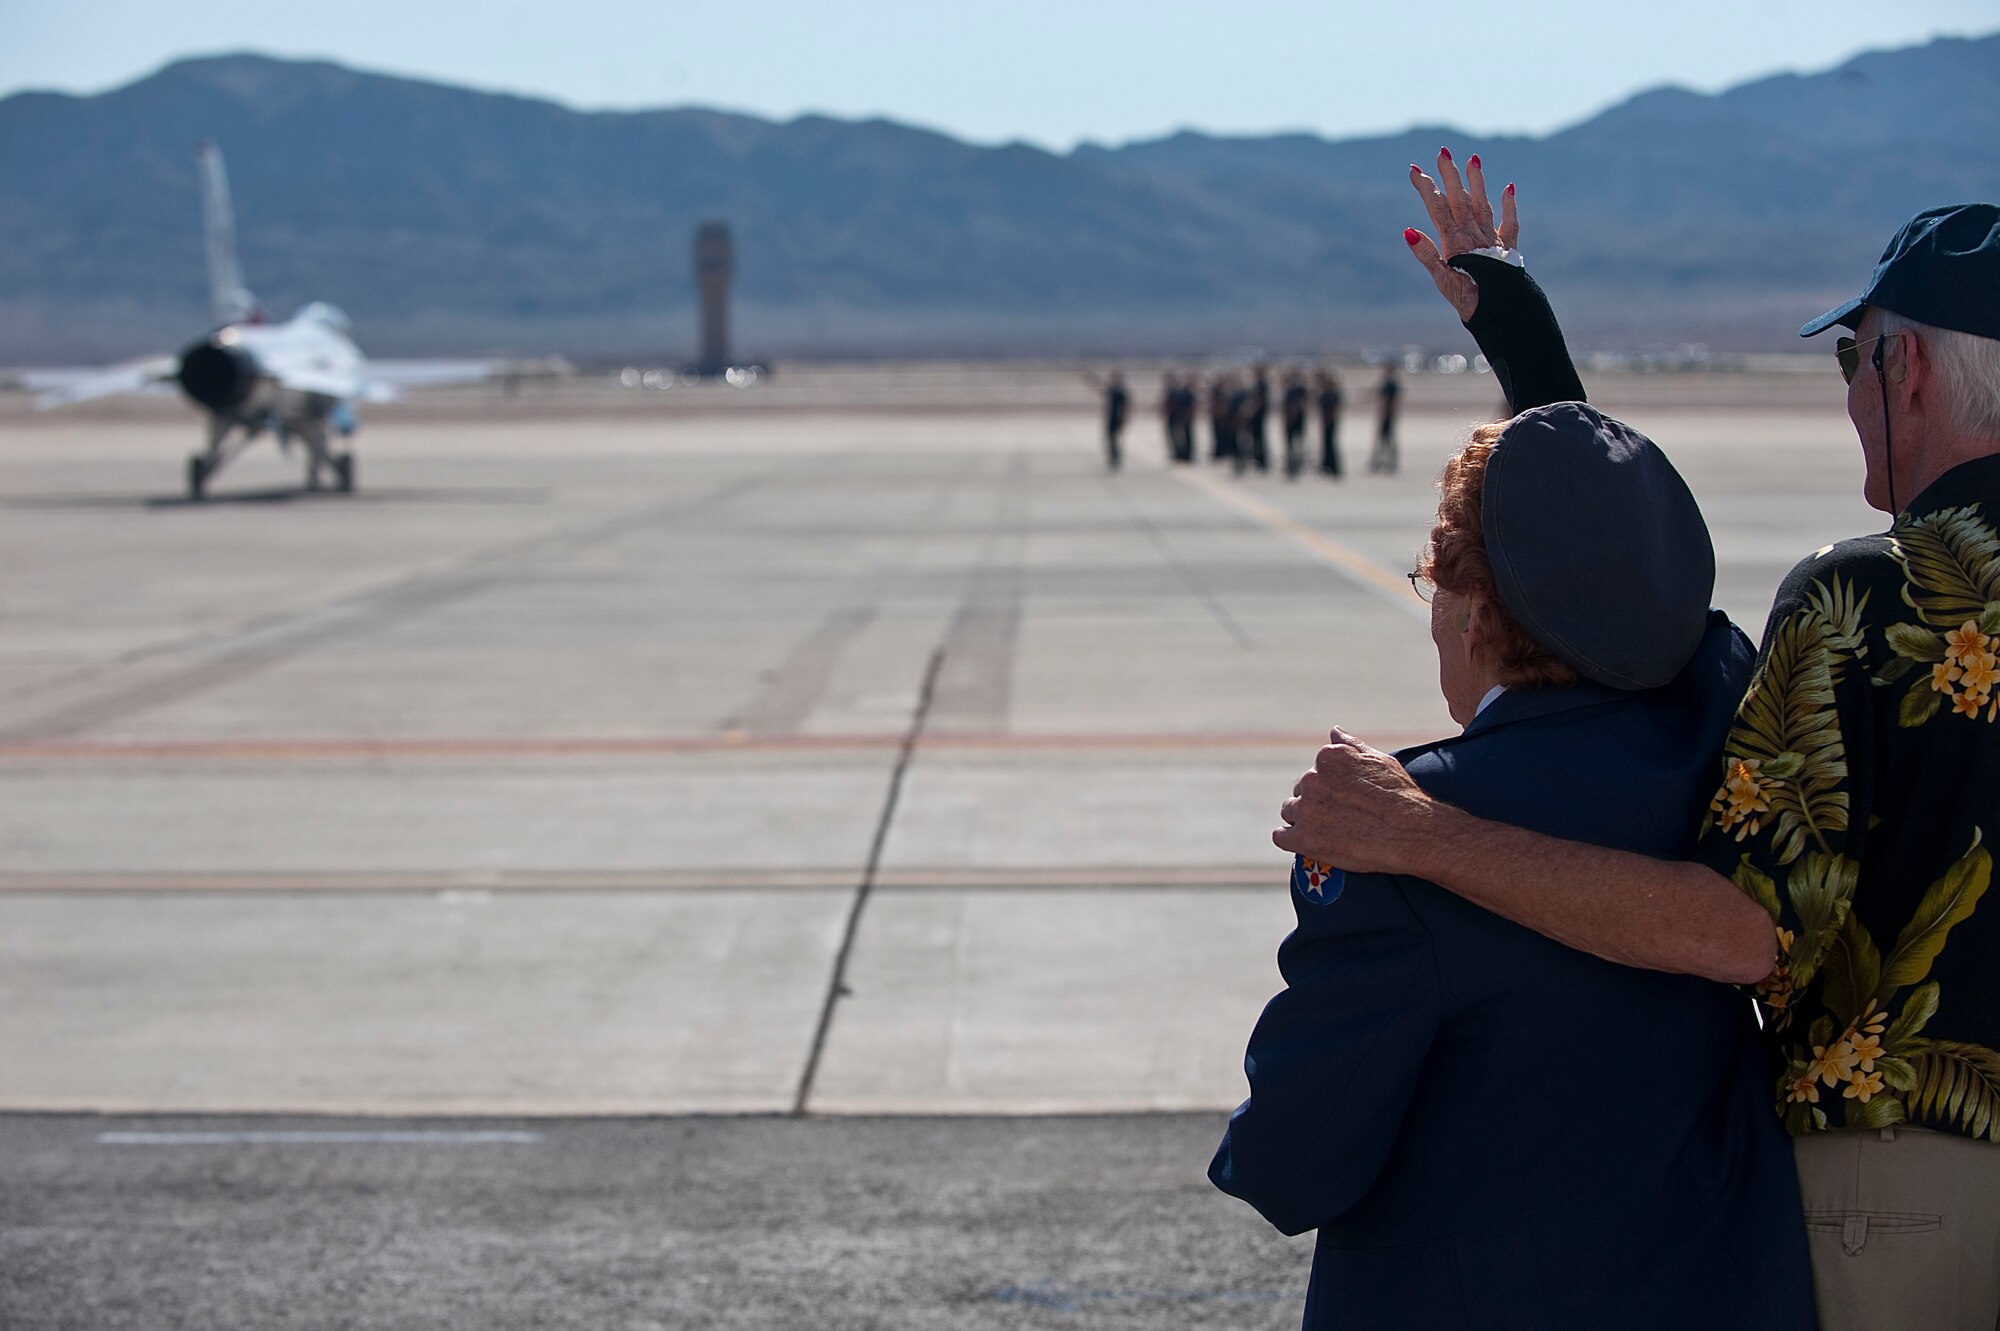 Betty Wall Strohfus, a WWII Women Airforce Service Pilot, and Mike Roberts, Strohfus' son, wave goodbye to U.S. Air Force Aerial Demonstration Squadron "Thunderbirds," pilots during a distinguished visit Sept. 27, 2012, at Nellis Air Force Base, Nev. Strohfus visited the Thunderbird Hangar, the Air Traffic Control Tower, and spoke with Airmen about her experiences during her visit. (U.S. Air Force photo by Staff Sgt. Christopher Hubenthal)